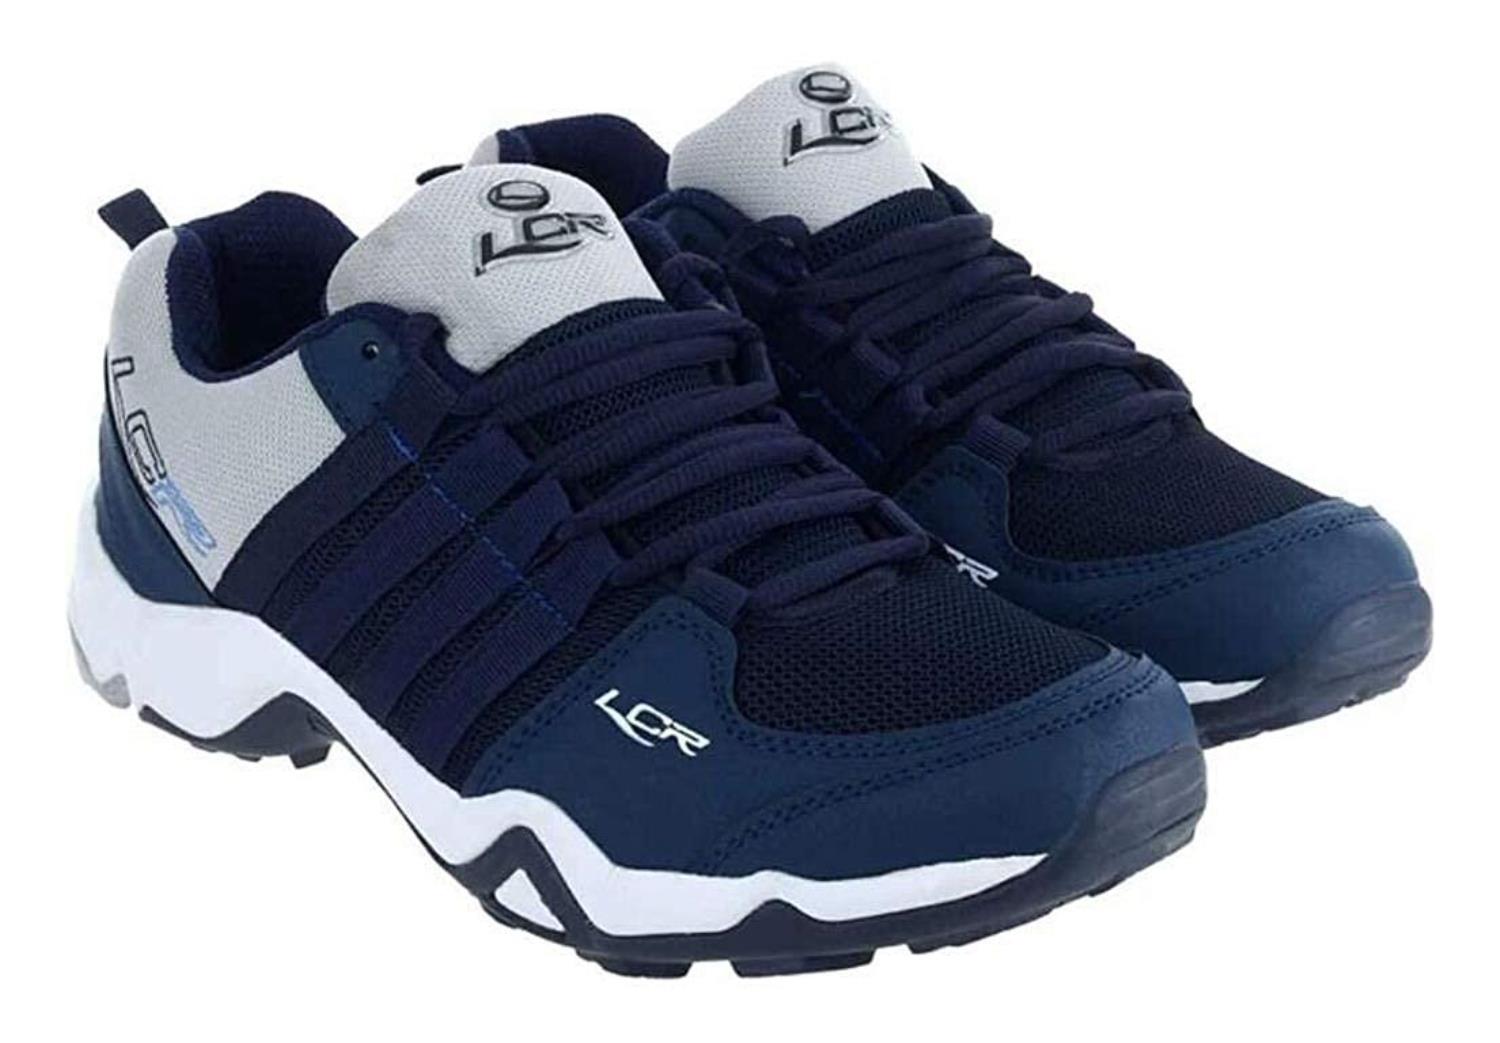 Lacoste Toddler Boy's Marcel LCR Fashion Dark Blue Sneakers Shoes Sz: 7 |  eBay-totobed.com.vn